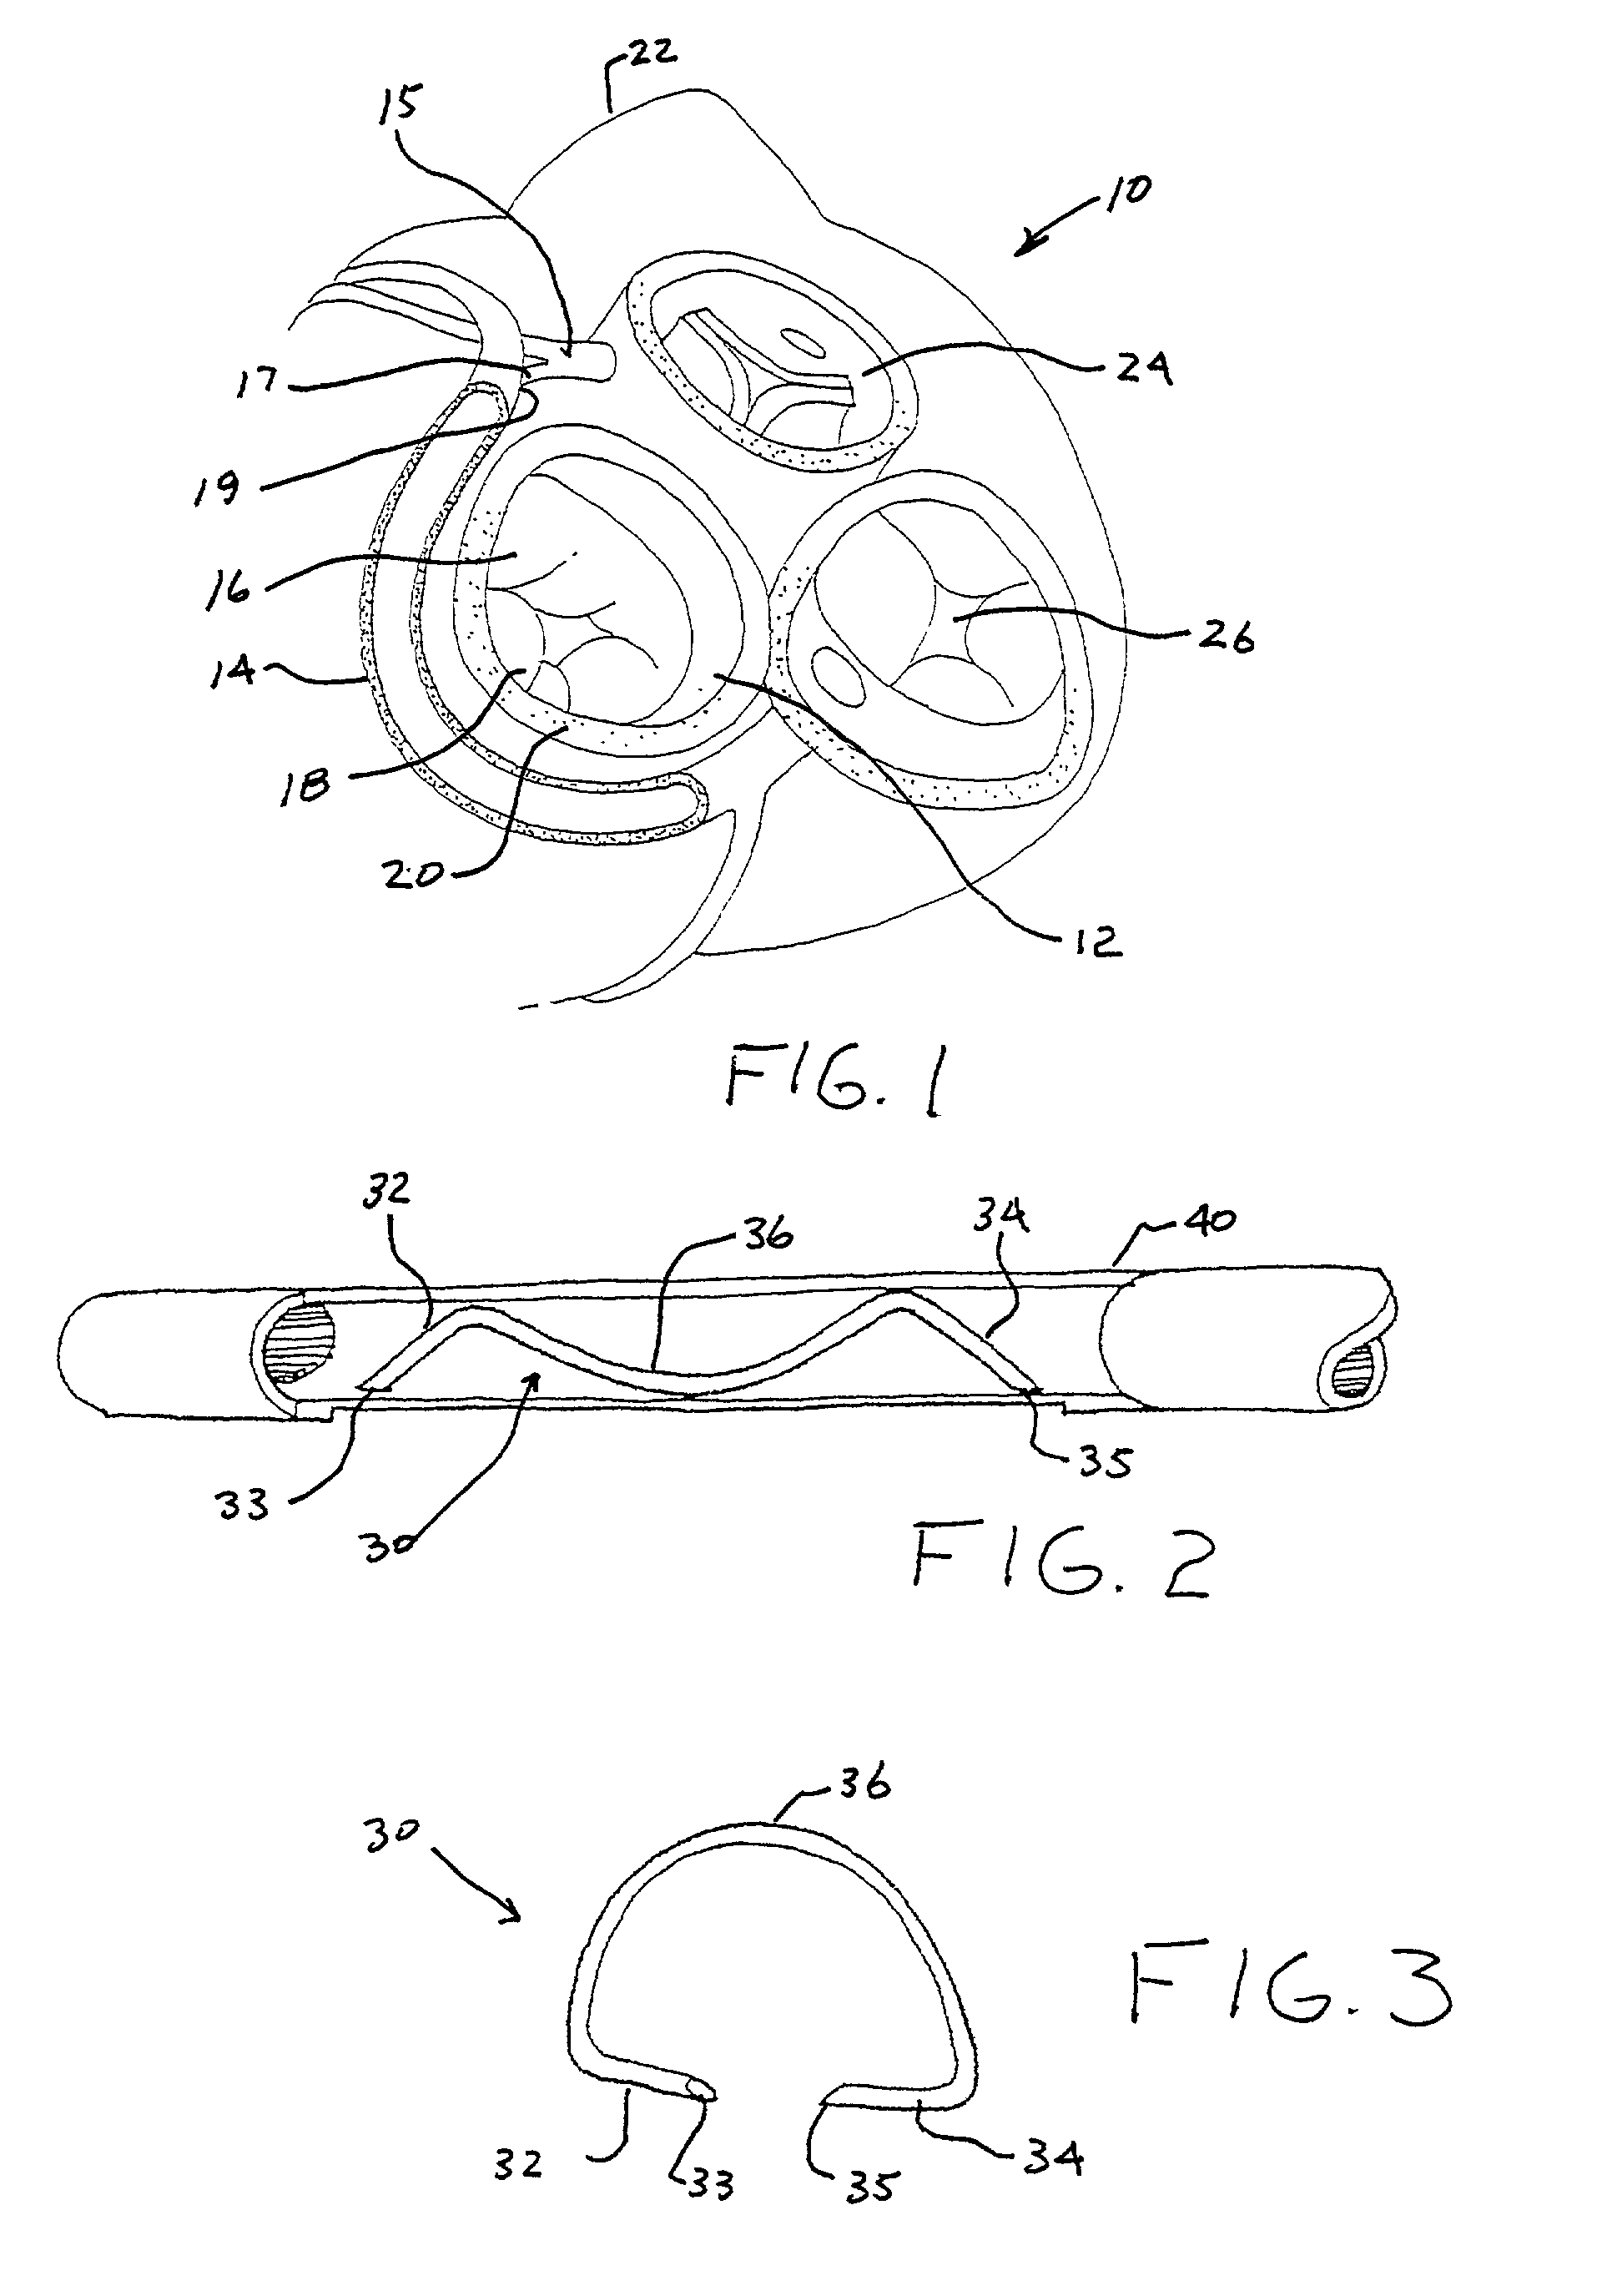 Transvenous staples, assembly and method for mitral valve repair